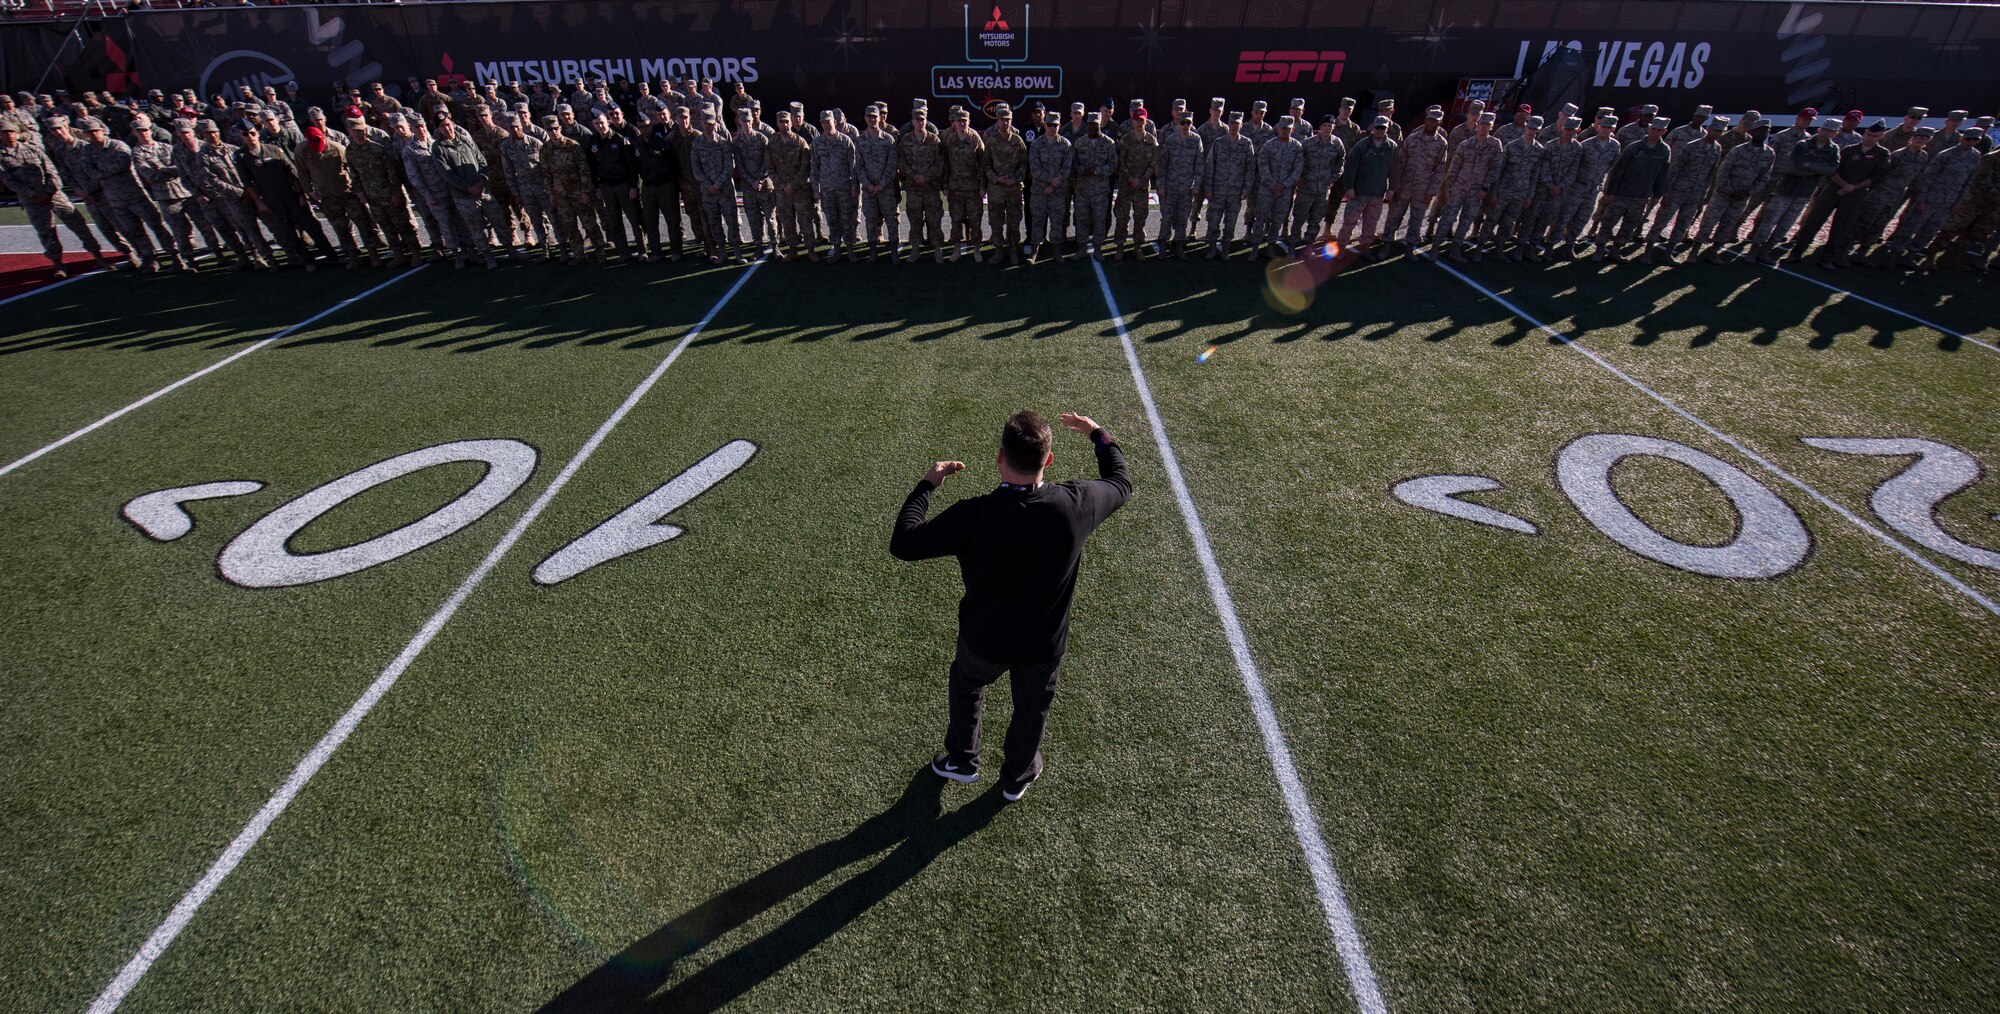 Rob Harden, 2018 Las Vegas Bowl flag team lead, speaks to Airmen assigned to Nellis and Creech Air Force bases, Nevada, before the opening ceremony at Sam Boyd Stadium in Las Vegas, Dec. 15, 2018. More than 200 Airmen volunteered to present a football field-sized American flag during the national anthem. (U.S. Air Force photo by Senior Airman Andrew D. Sarver)